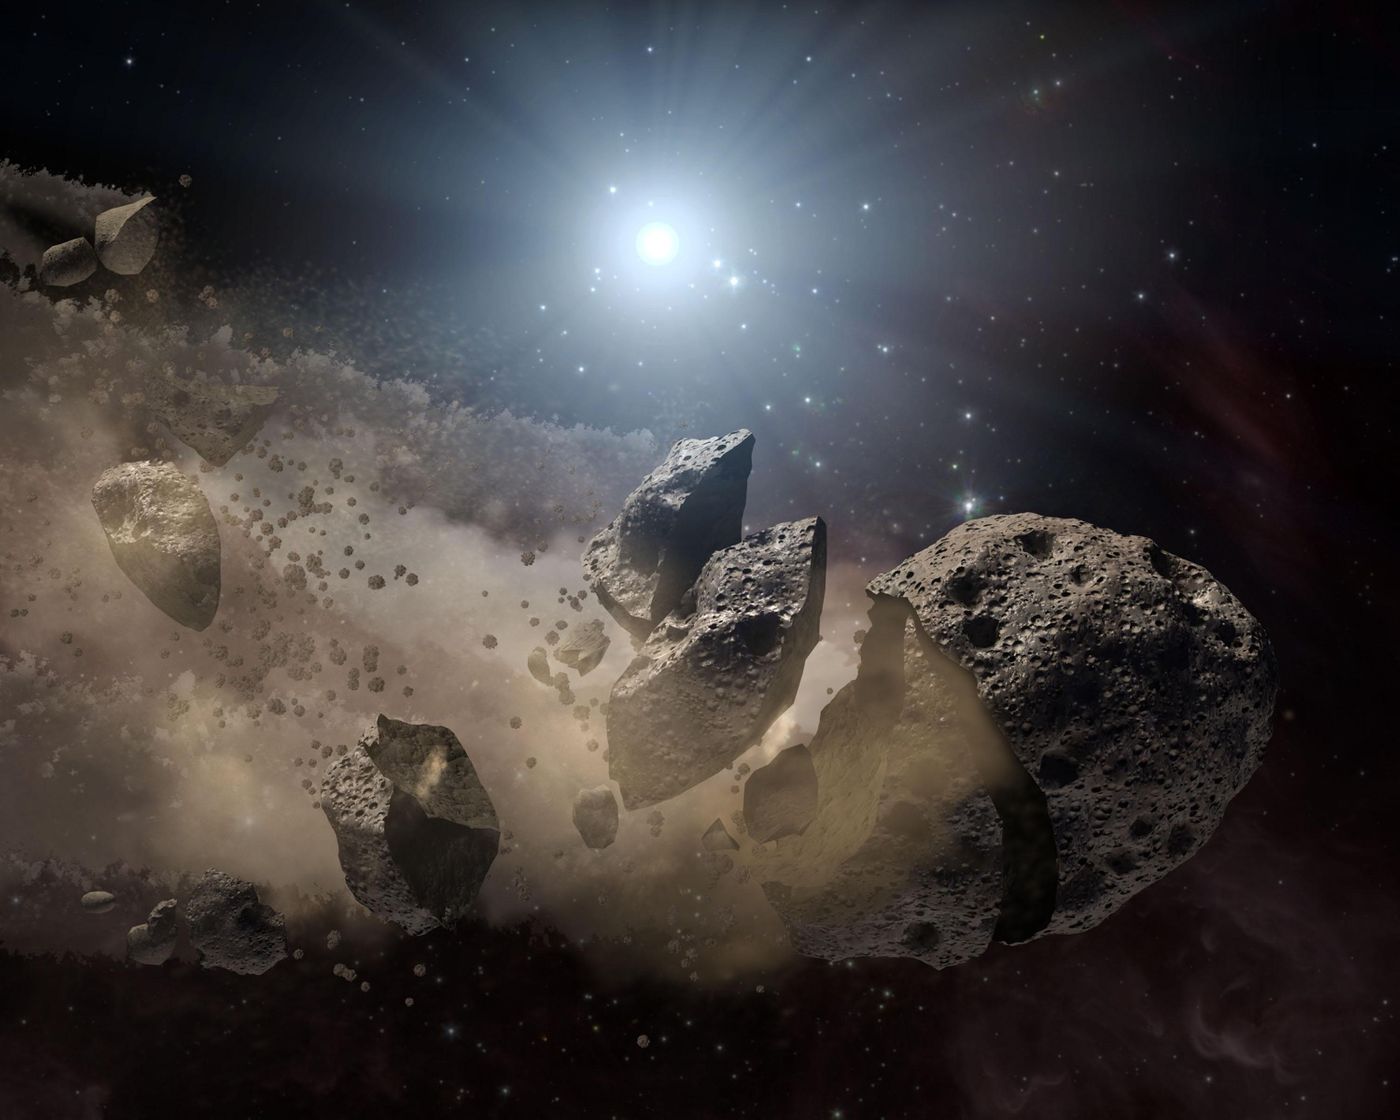 Near-Earth Asteroids may be fewer and farther in between than originally anticipated.